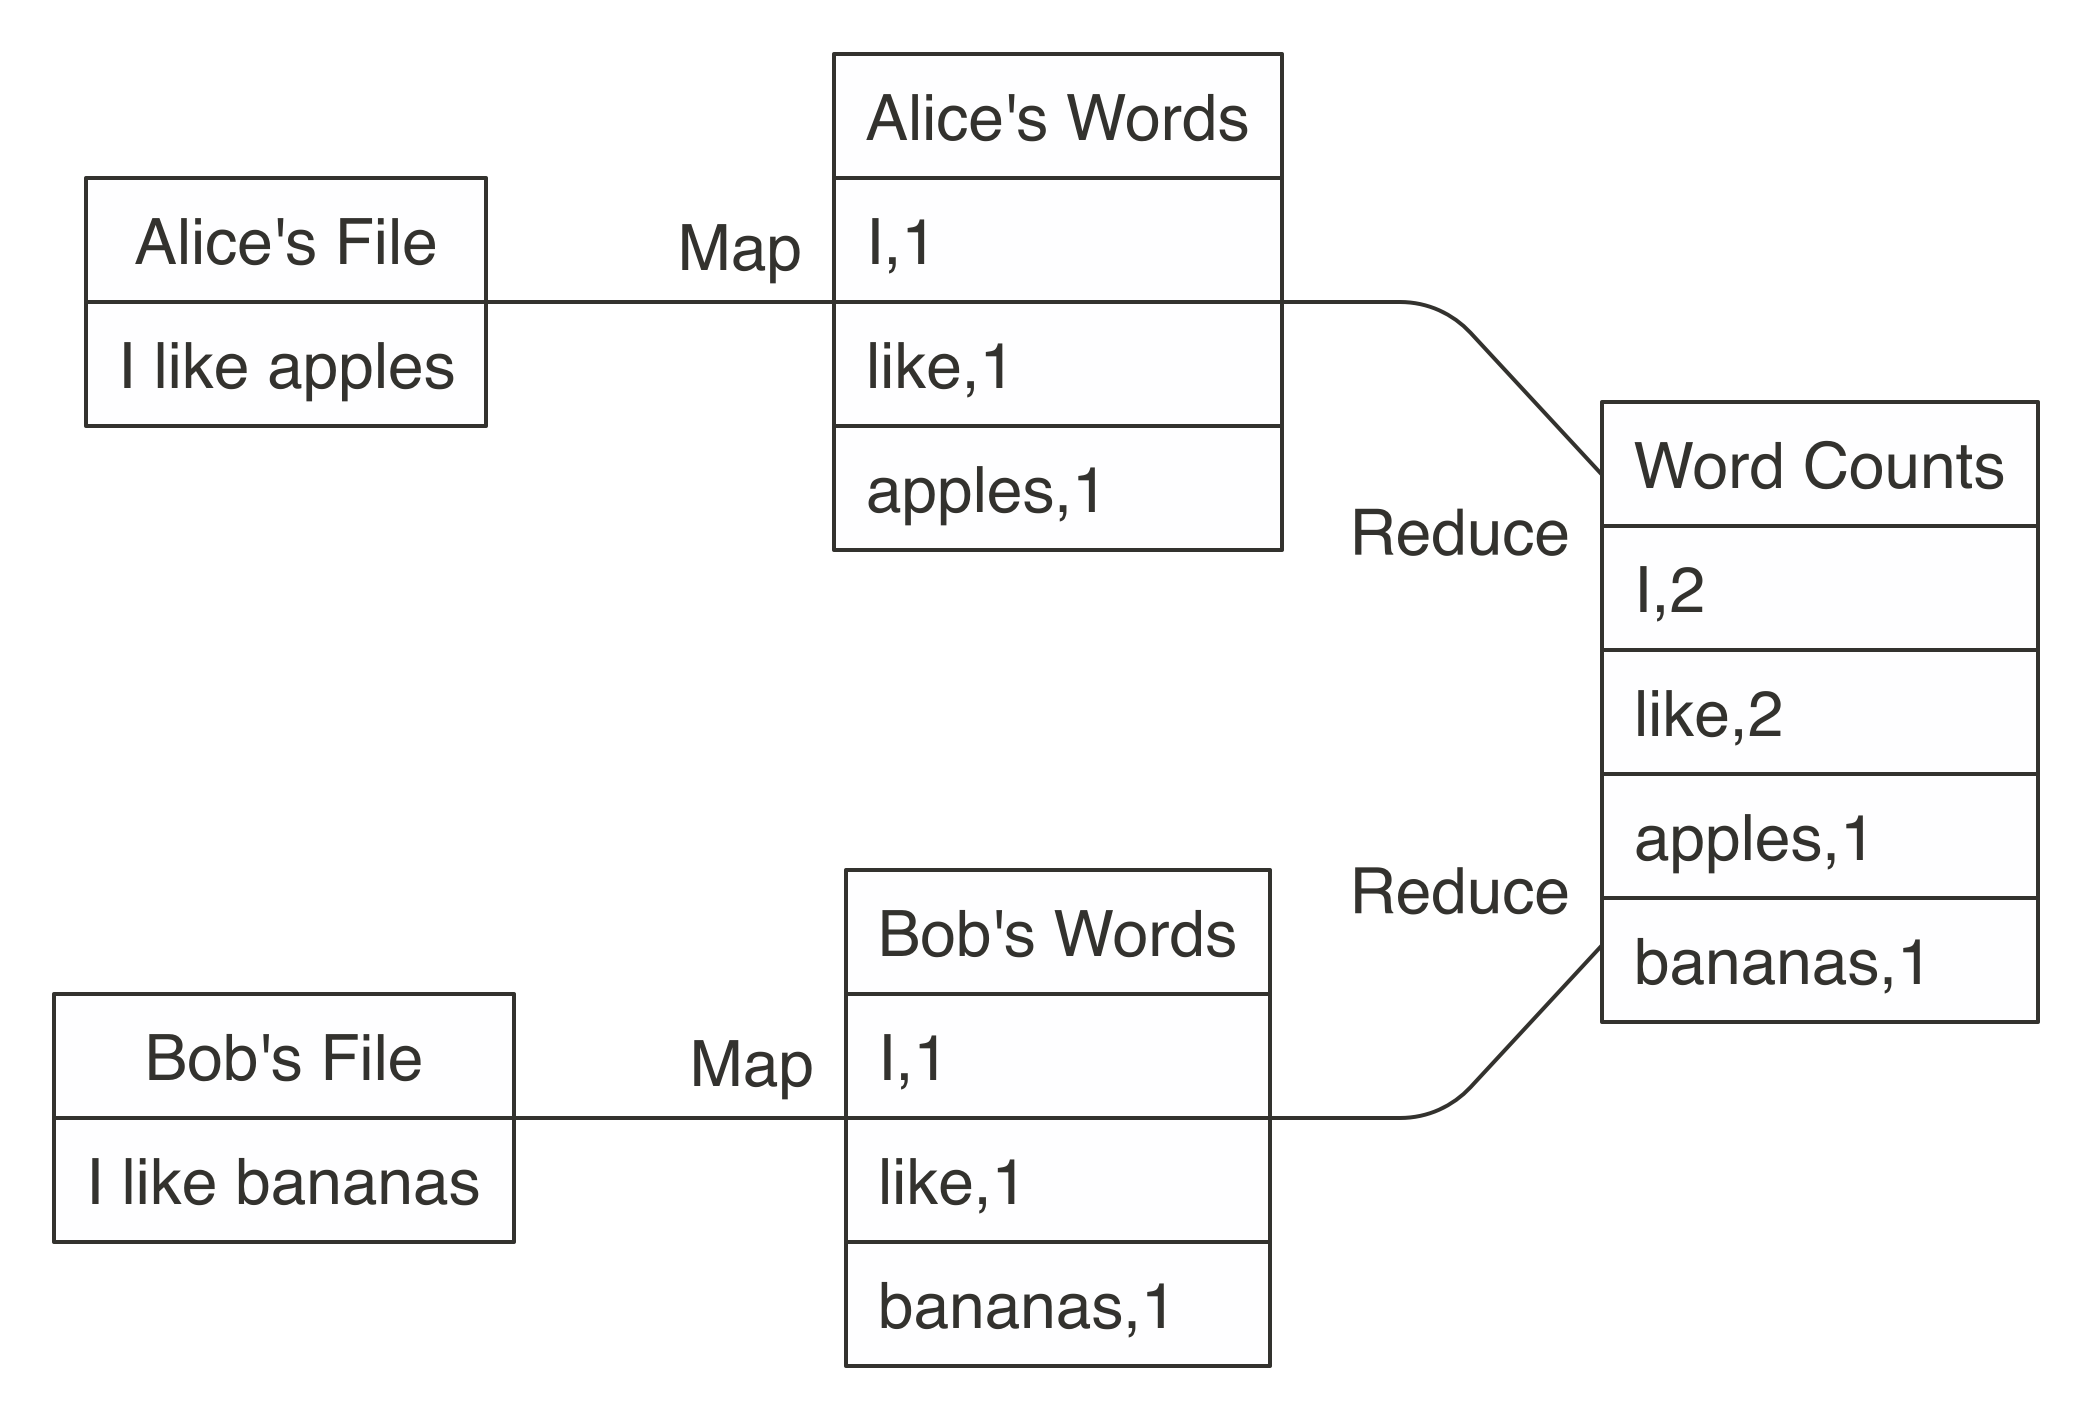 MapReduce example counting words across files